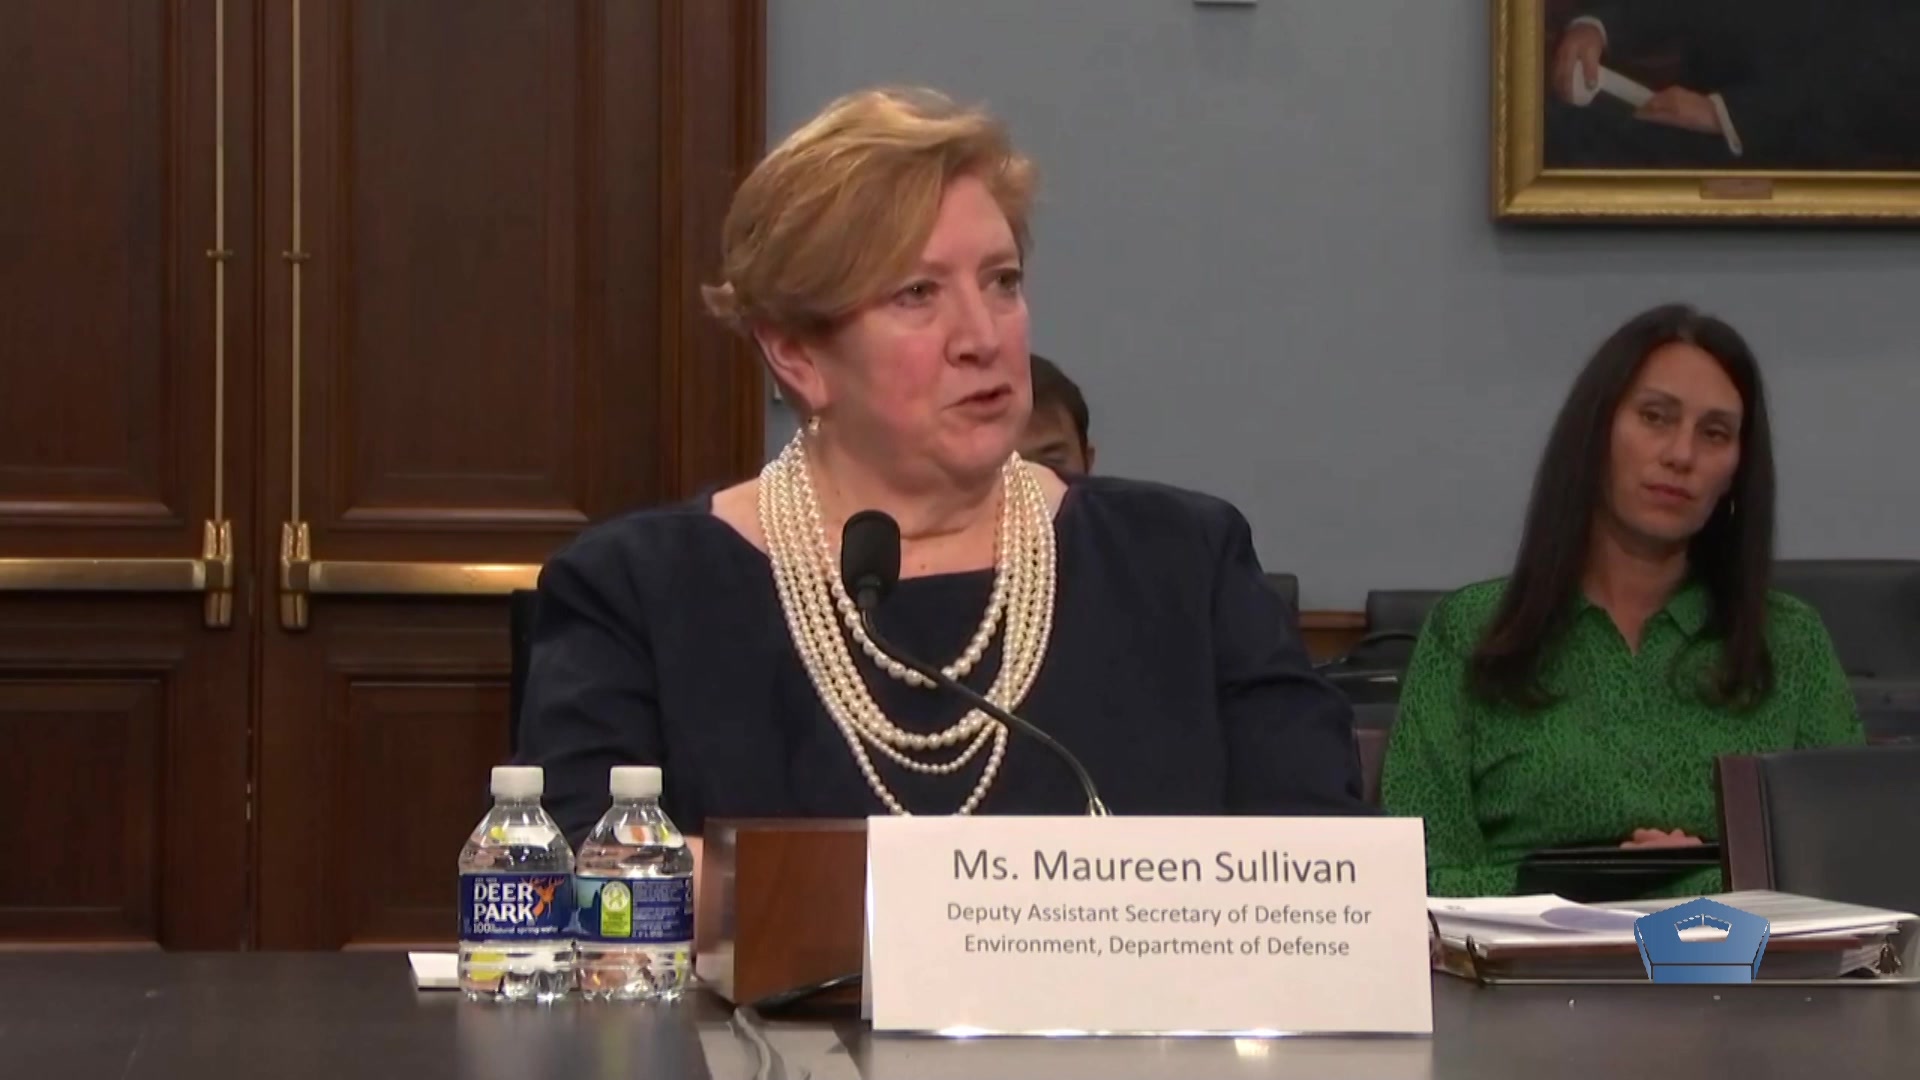 Maureen Sullivan, deputy assistant secretary of defense for environment, Department of Defense, testifies at the House Appropriations subcommittee hearing concerning the impact of PFAS exposure on servicemembers, March 11, 2020. Per- and polyfluoroalkyl substances (PFAS) are a group of man-made chemicals that are very persistent in the environment and in the human body – meaning they don’t break down and they can accumulate over time. There is evidence that exposure to PFAS can lead to adverse human health effects. 